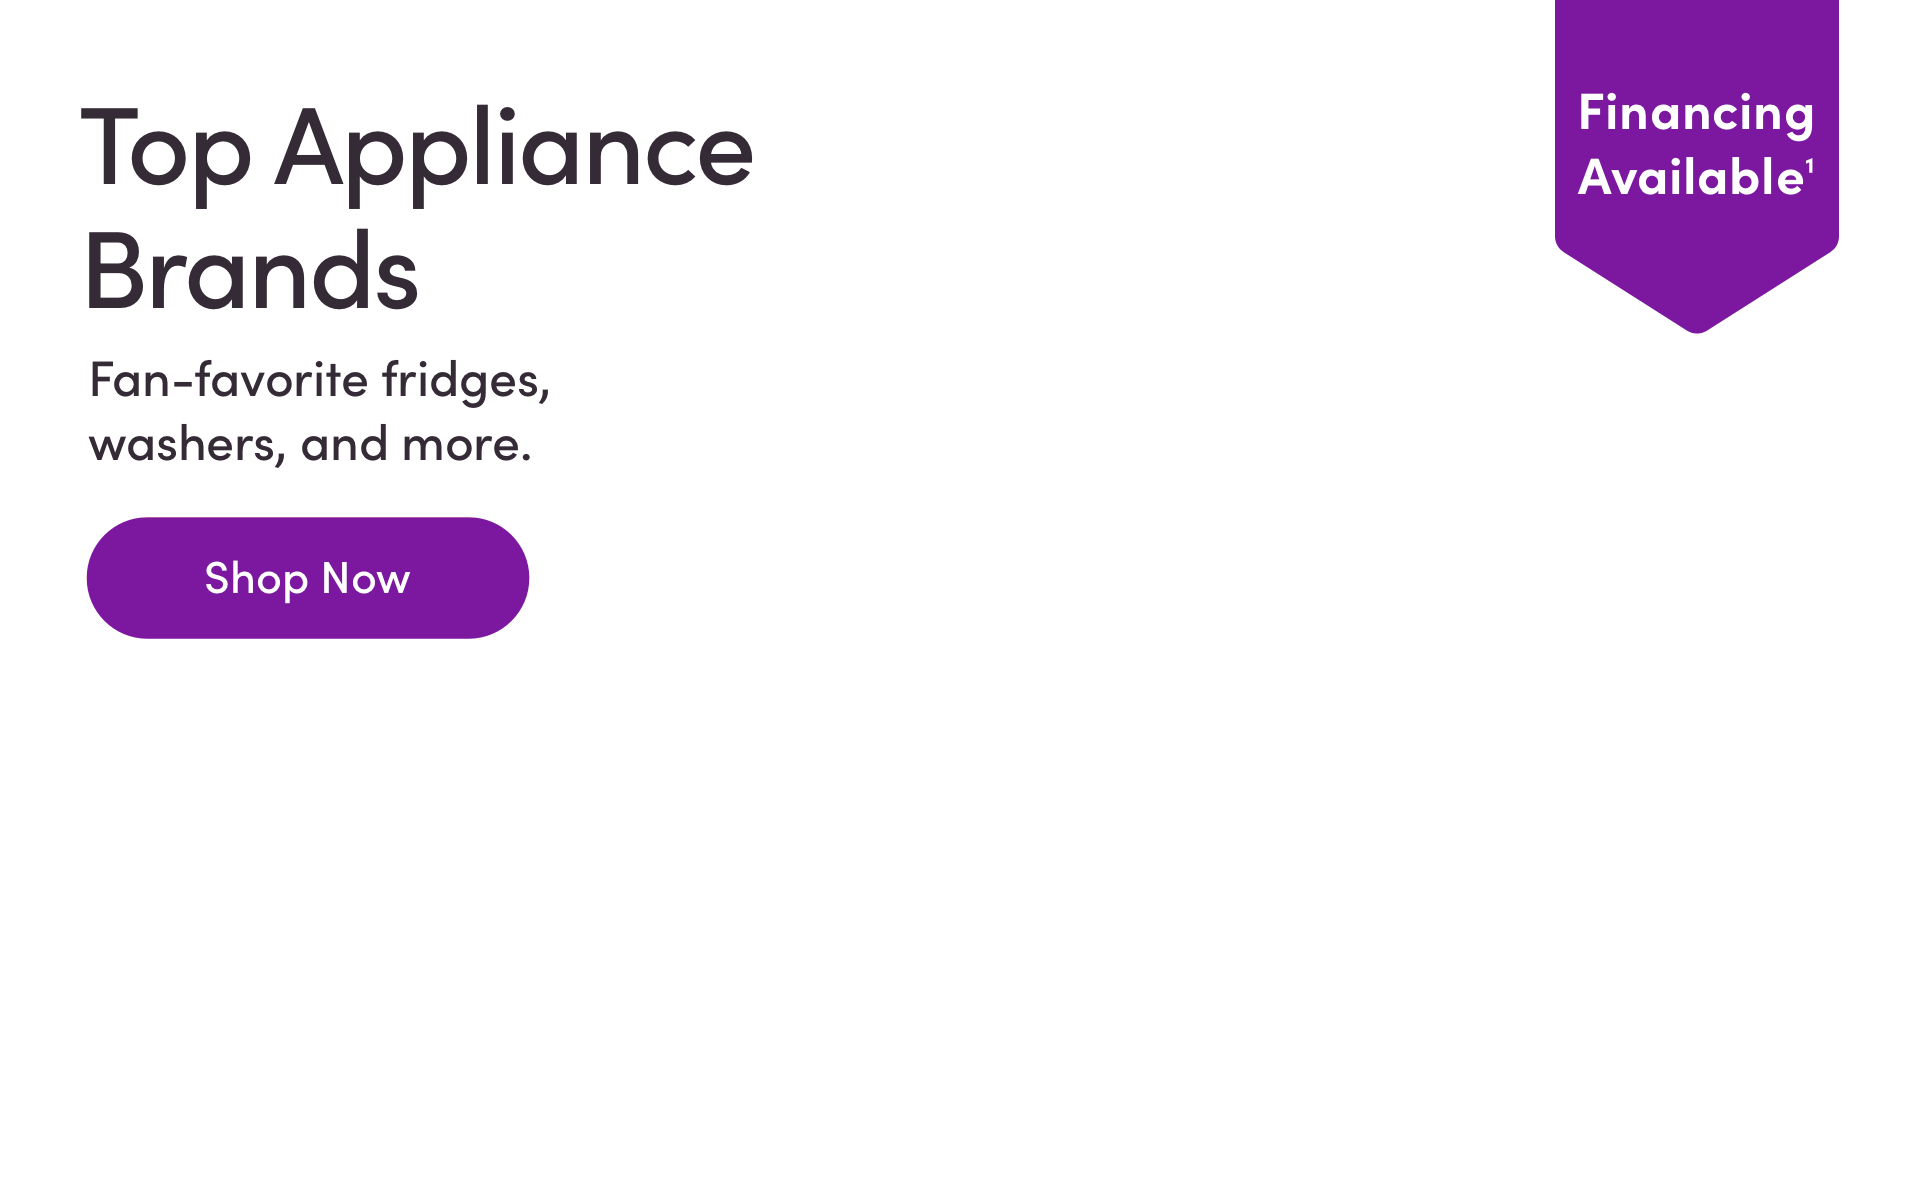 Financing Available. Top Appliance Brands. Shop Now.